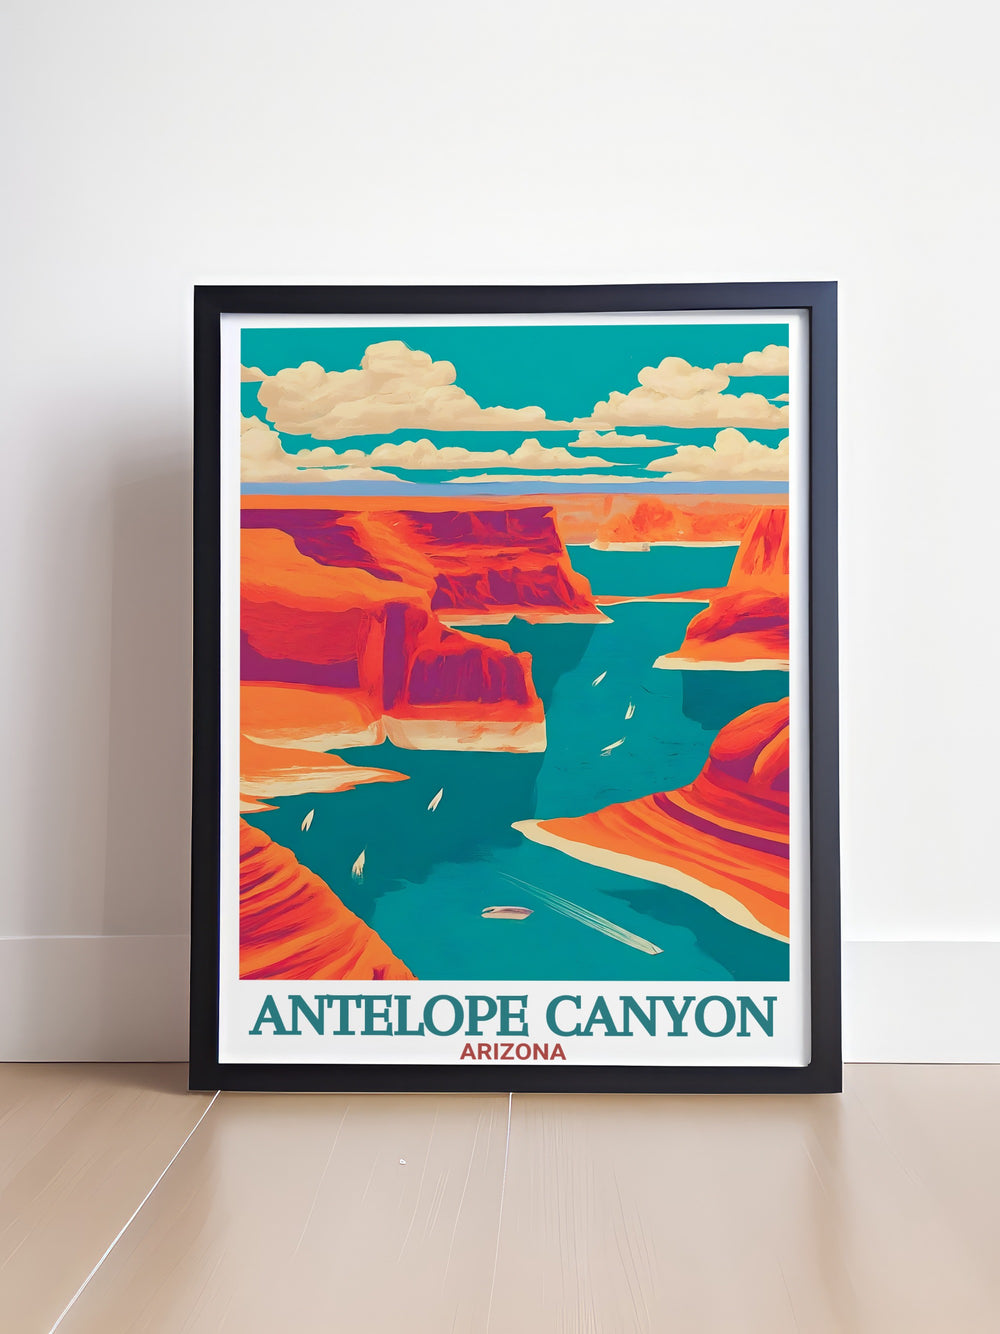 Beautiful Lake Powell artwork featuring the serene landscapes and expansive scenery of this breathtaking Arizona landmark ideal for those who appreciate the beauty of natural wonders and want to enhance their home decor.